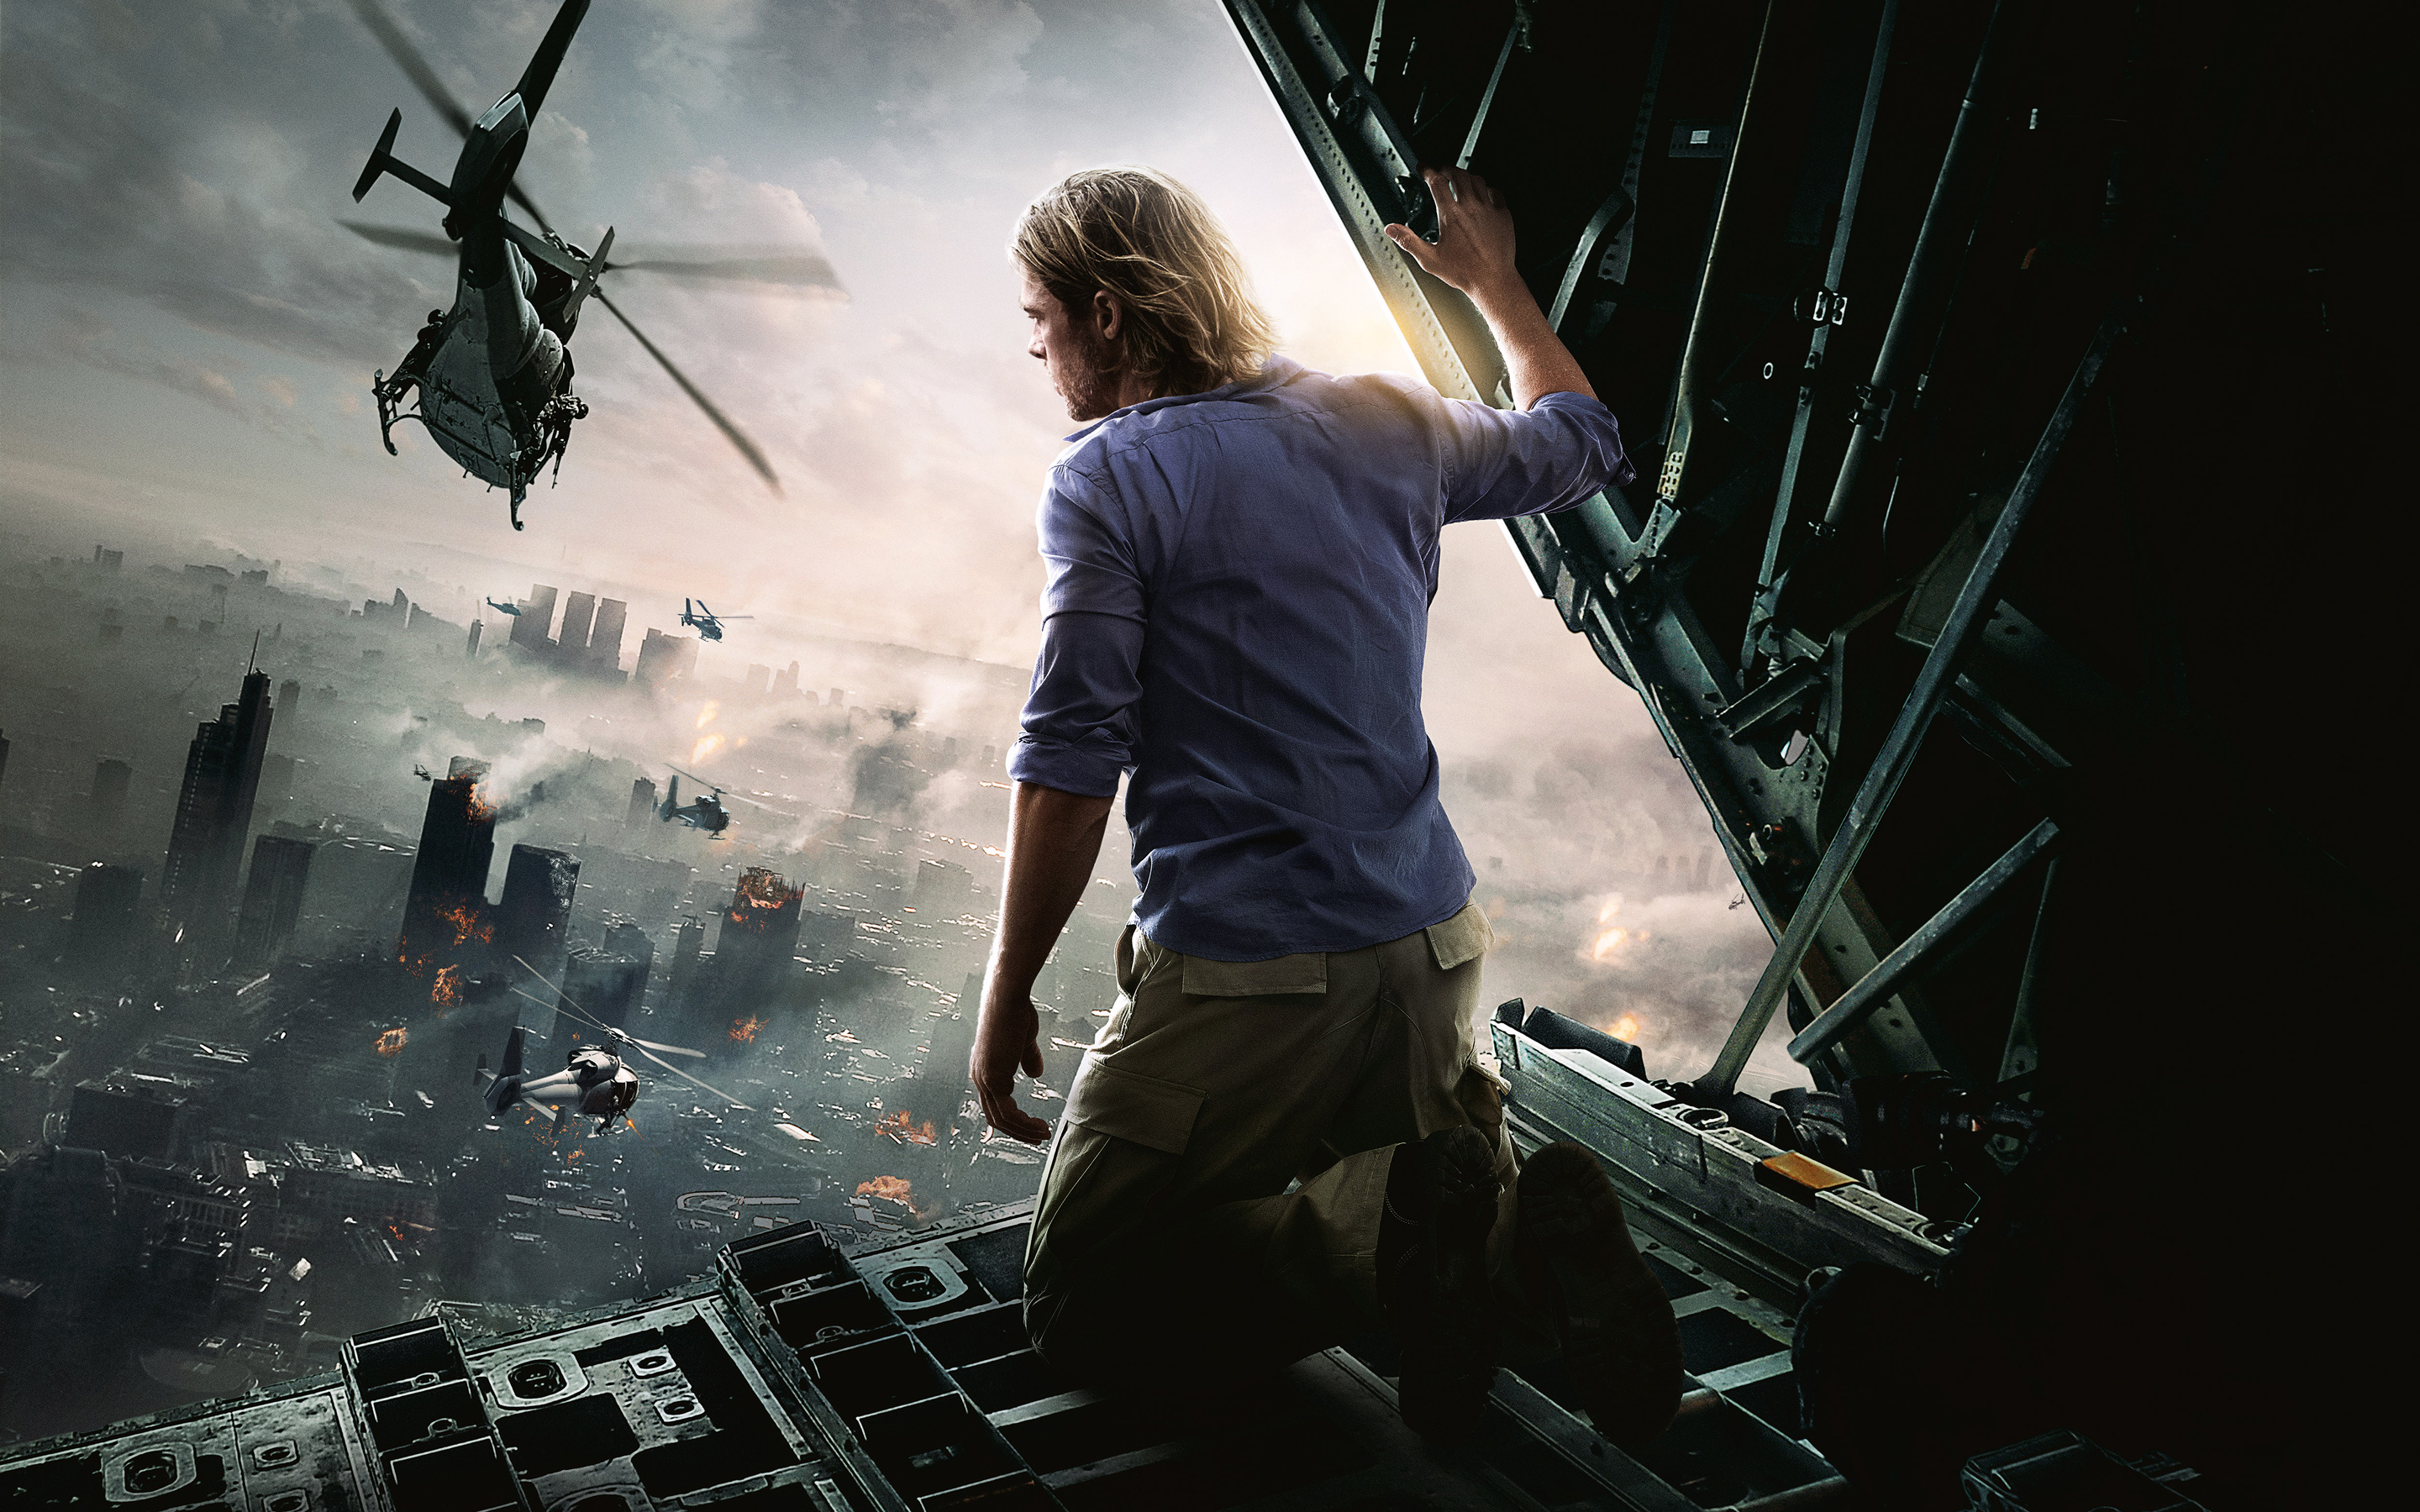 Camouflage A World War Z Lesson My Nitty Gritty Thoughts